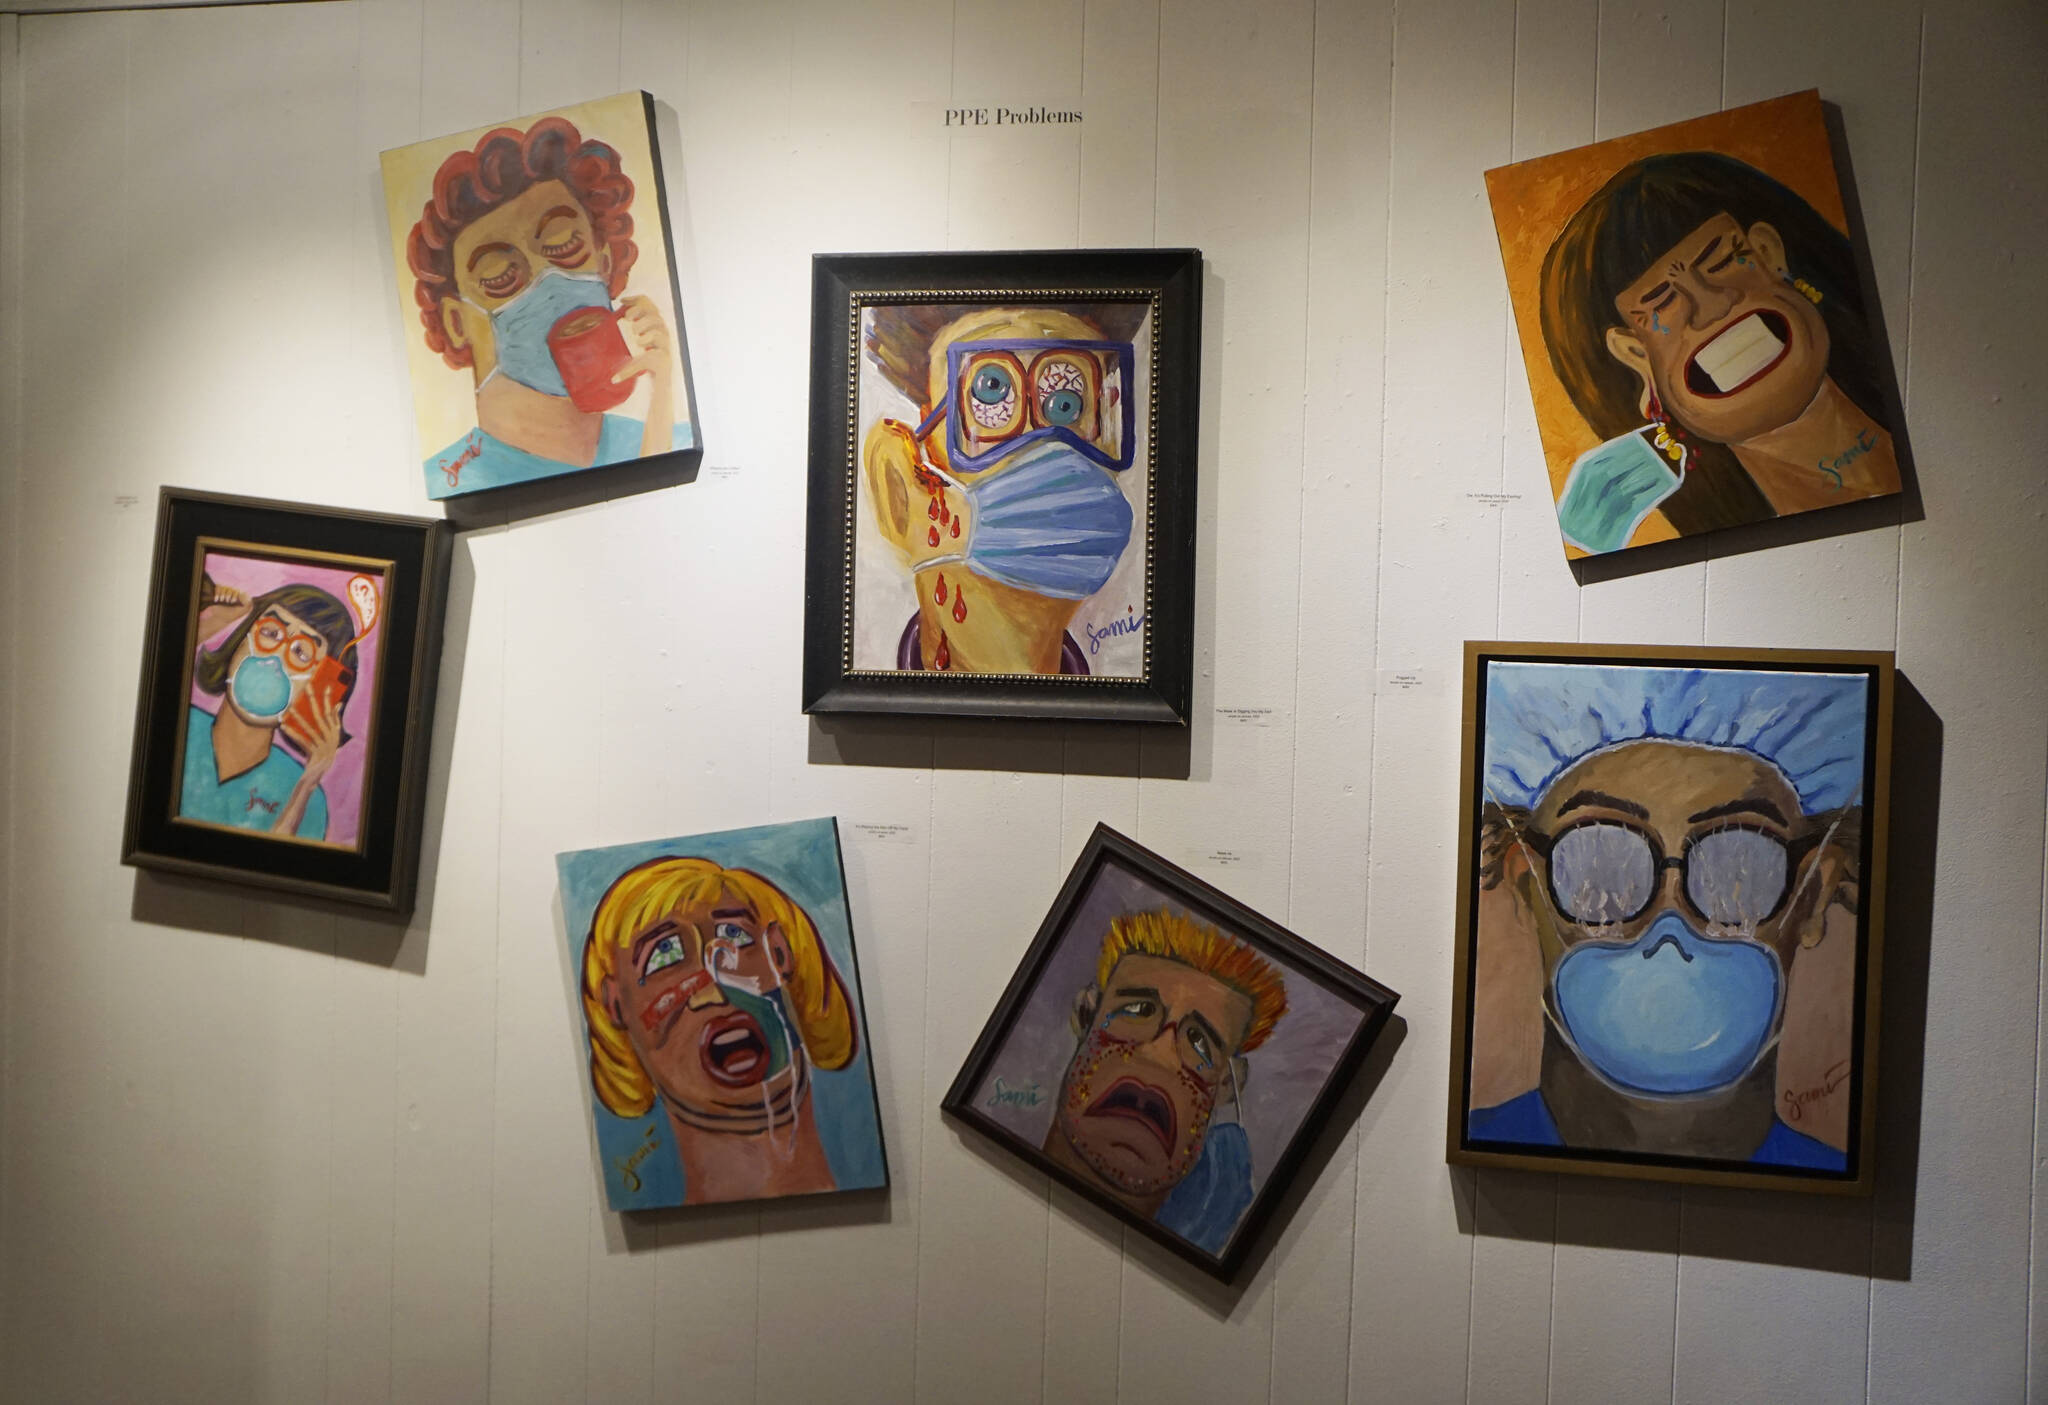 “PPE Problems” is a panel of paintings in Dr. Sami Ali’s exhibit, “The Mind of a Healthcare Worker During the COVID-19 Pandemic,” showing in January 2022 at the Homer Council on the Arts in Homer, Alaska. The paintings show issues people had with wearing face masks. (Photo by Michael Armstrong/Homer News)